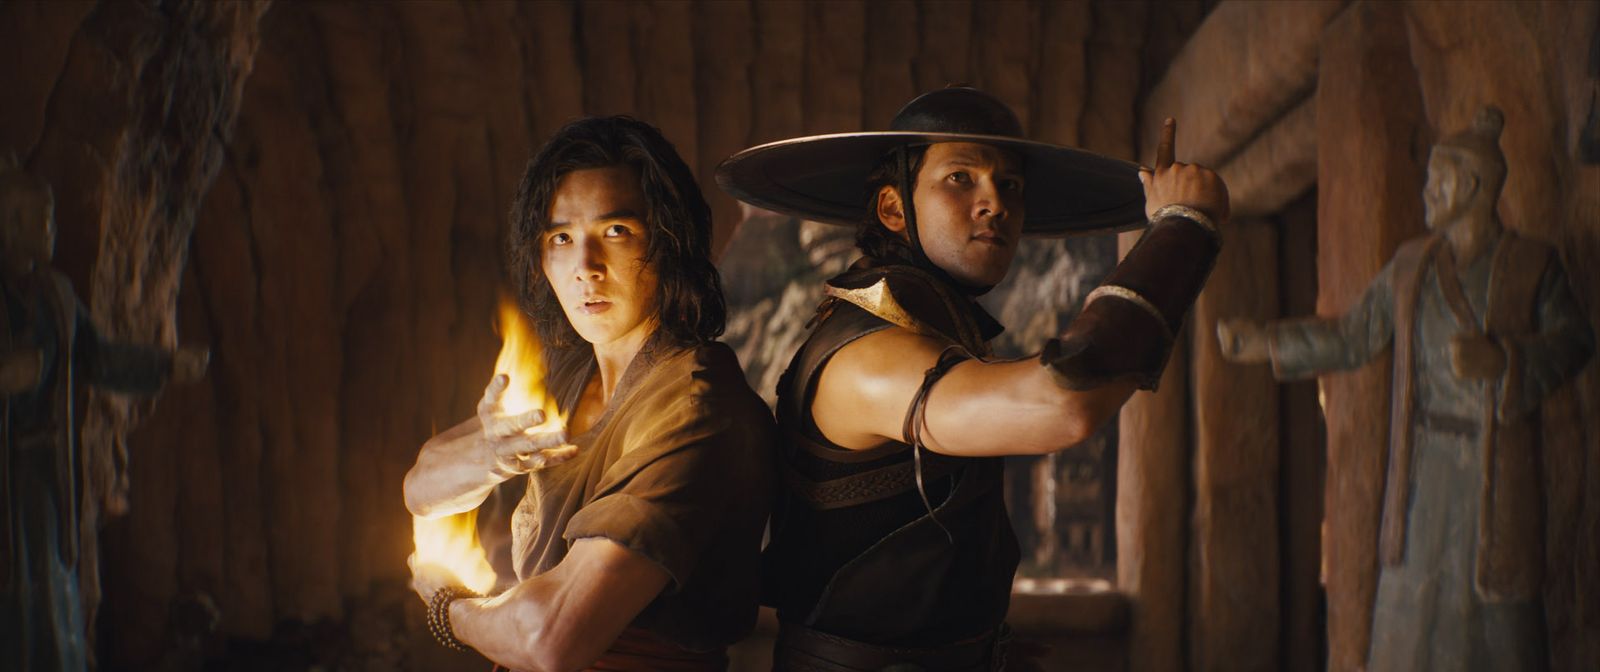 (L-r) LUDI LIN as Liu Kang and MAX HUANG as Kung Lao in New Line Cinema’s action adventure “Mortal Kombat,” a Warner Bros. Pictures release. 